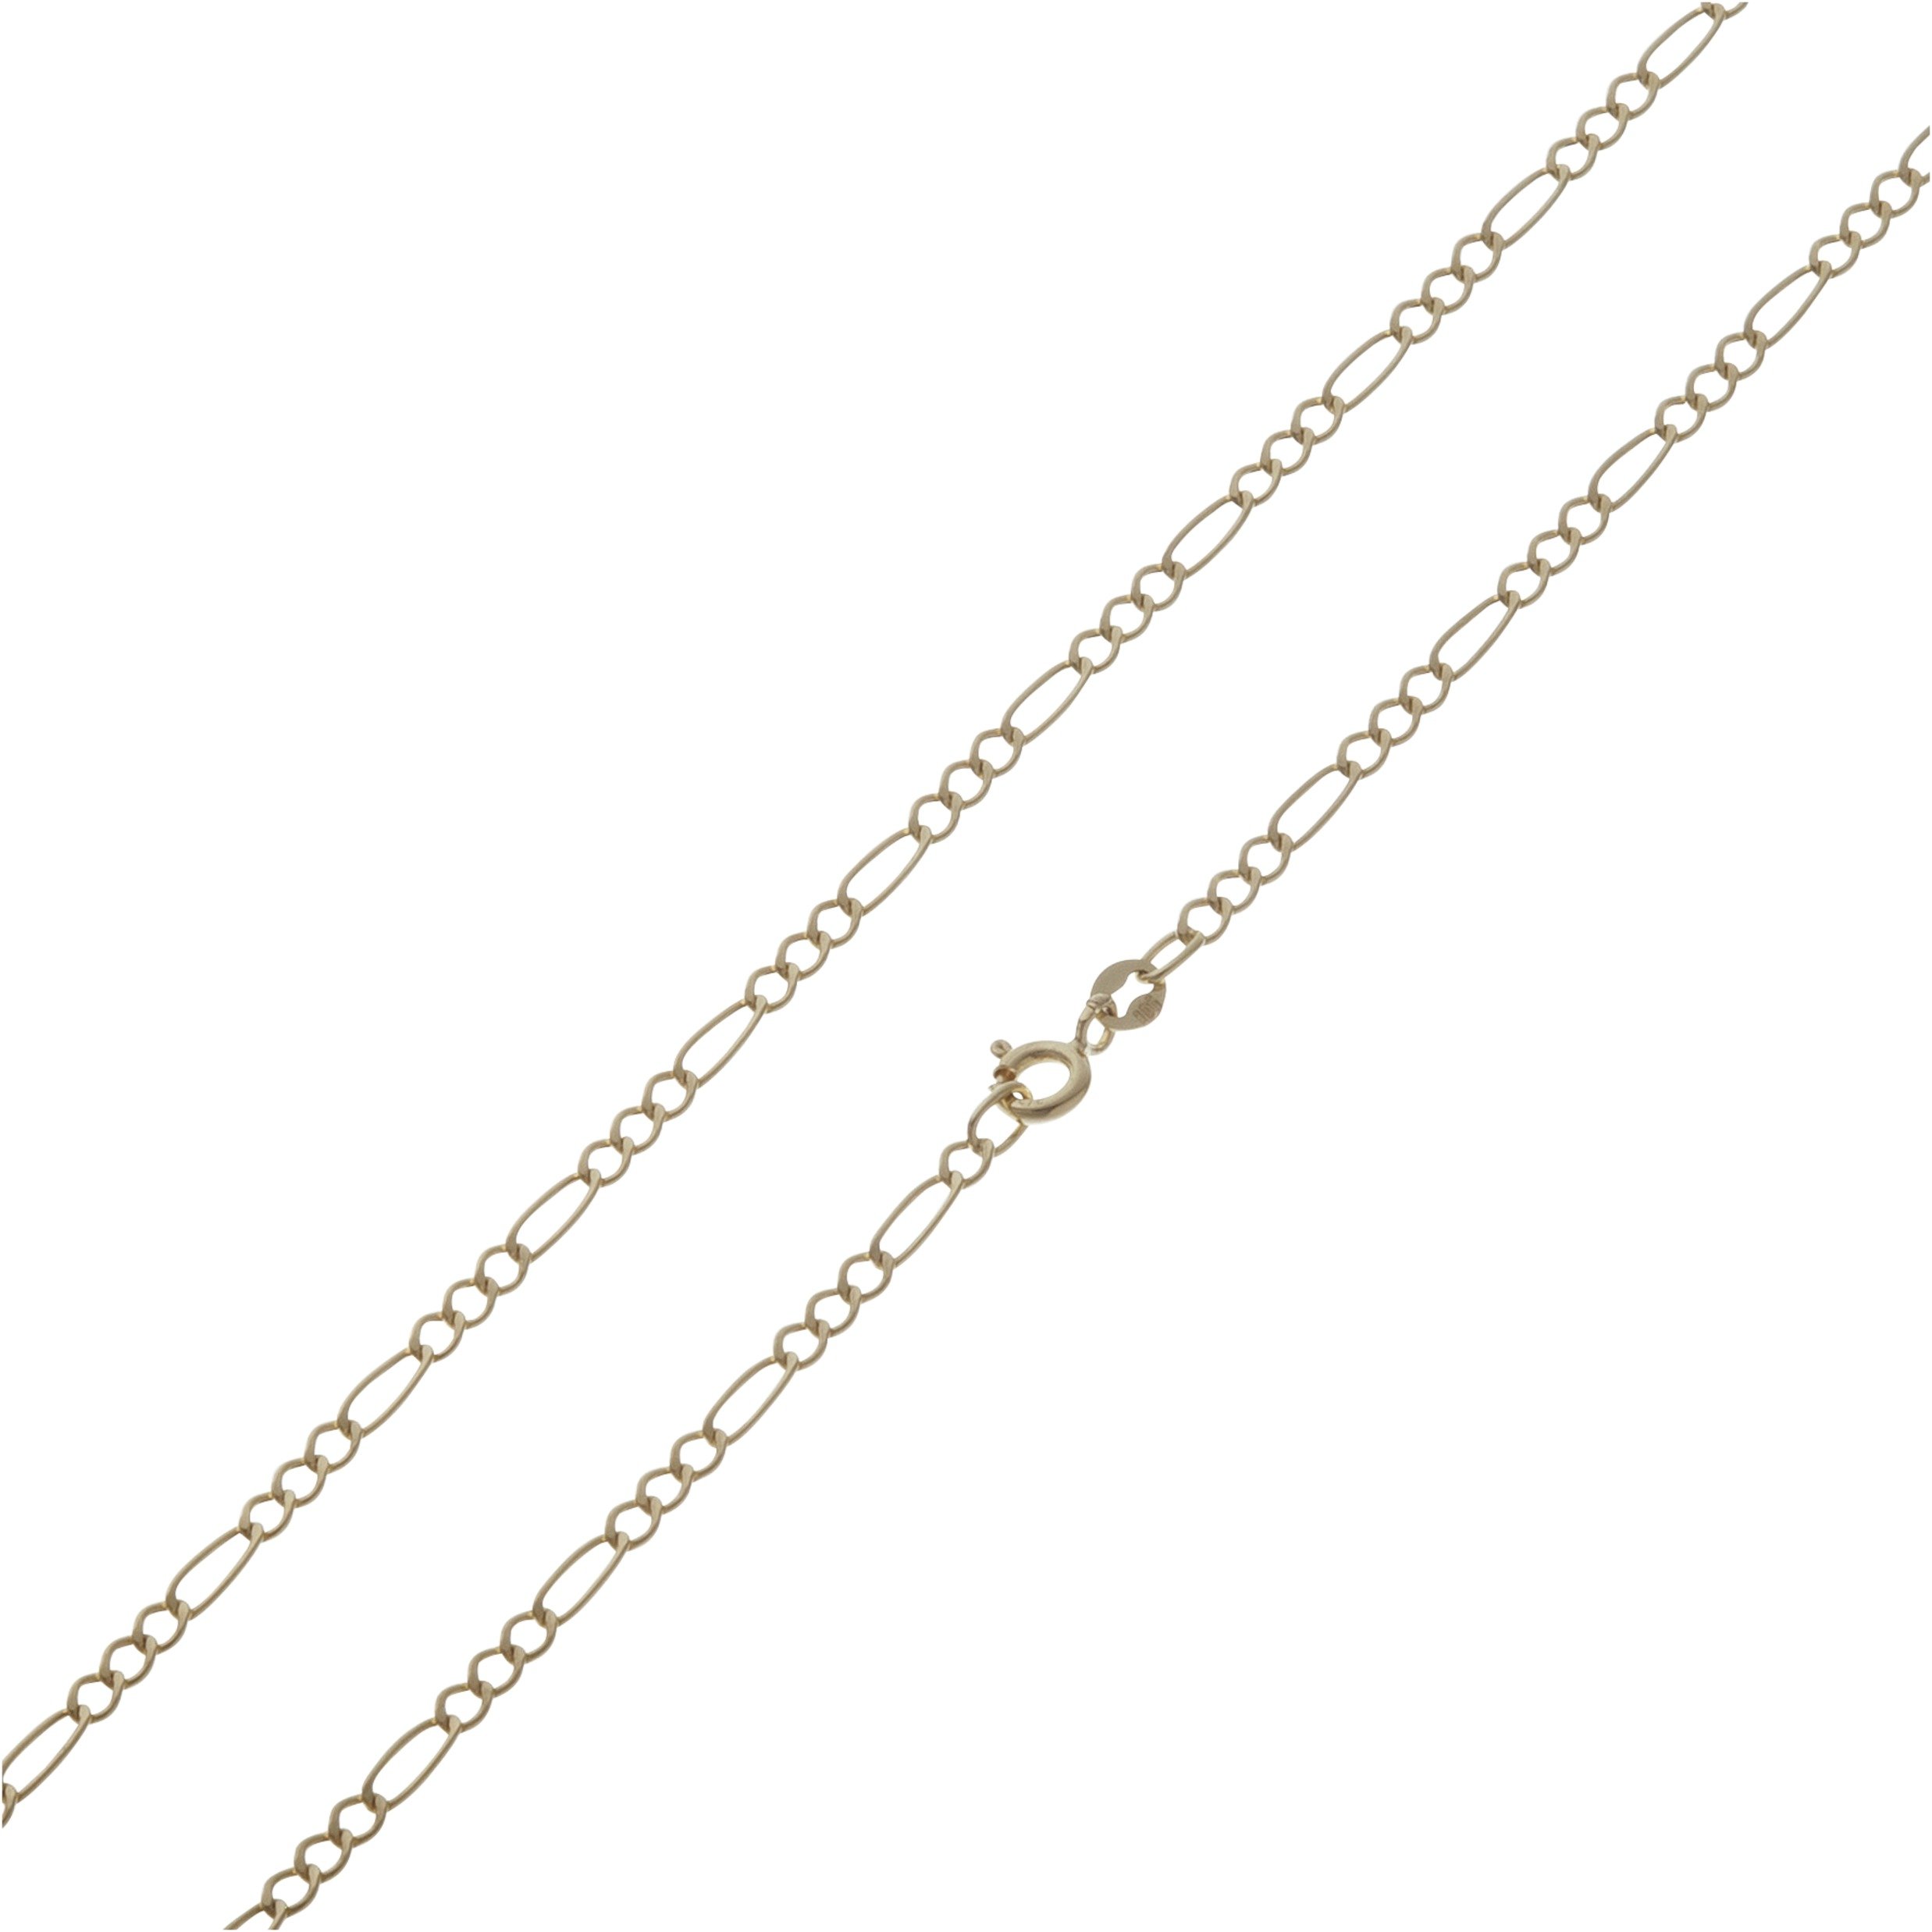 Revere 9ct Yellow Gold 3-in-1 Figaro 24 Inch Chain